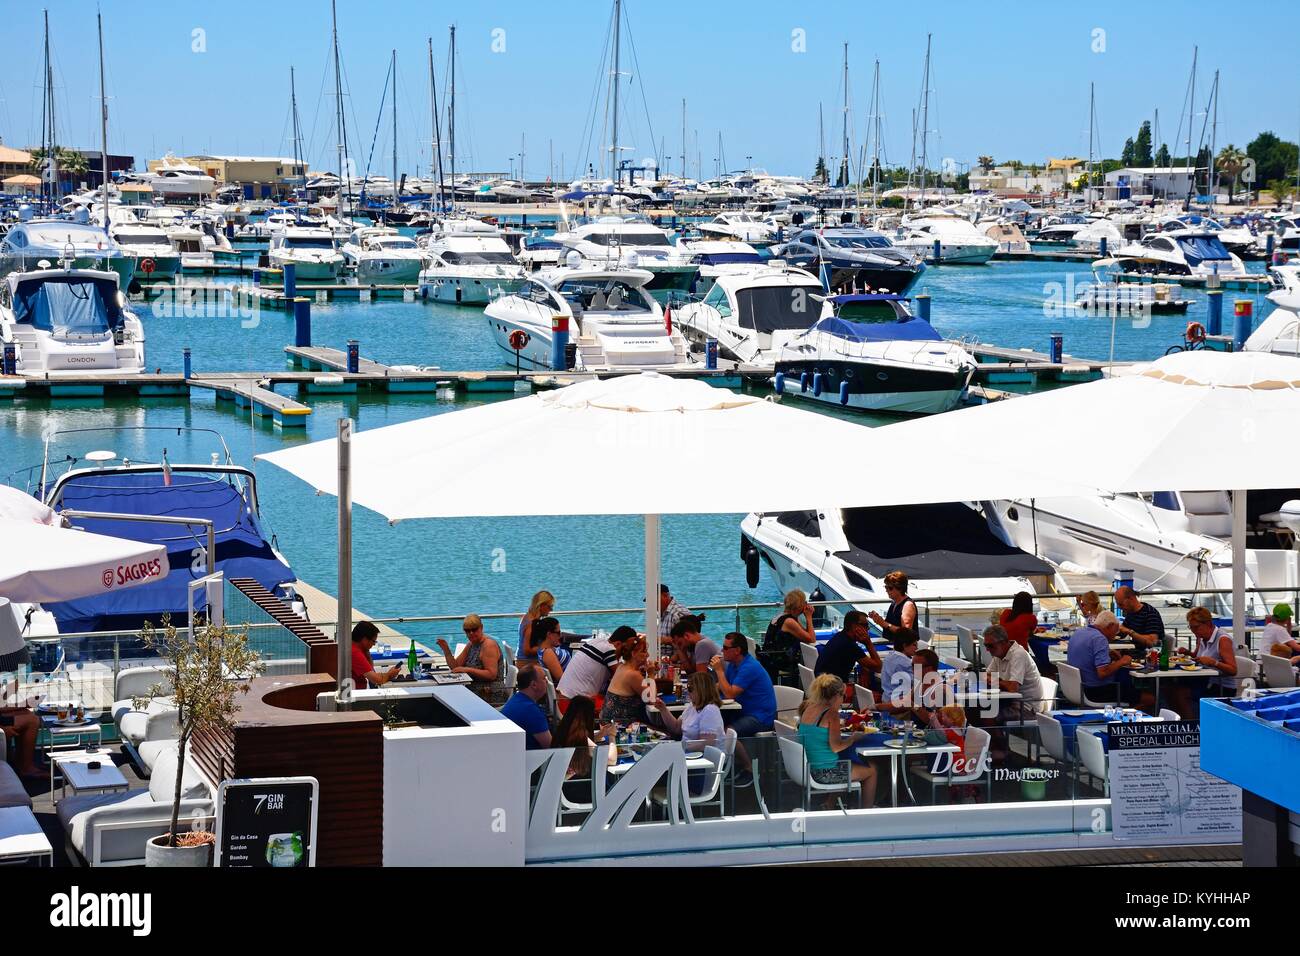 Luxury boats moored in the marina with waterfront restaurants in the foreground, Vilamoura, Algarve, Portugal, Europe. Stock Photo